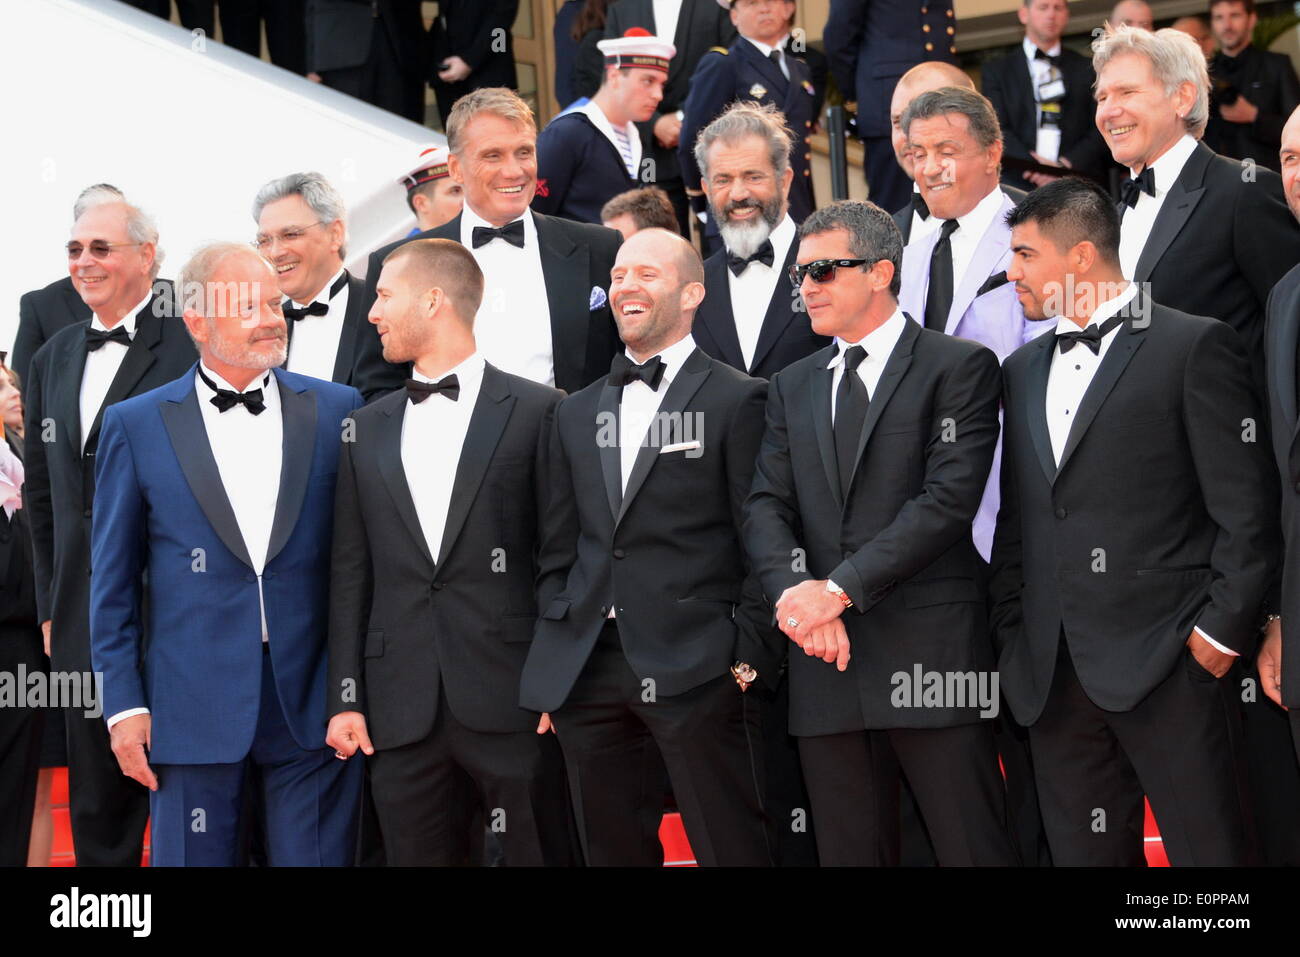 May 18, 2014 - Cannes, France - CANNES, FRANCE - MAY 18: (Top L-R) Actors Glen Powell, Kelsey Grammer, Dolph Lundgren, Harrison Ford, director Patrick Hughes, actors Antonio Banderas, Randy Couture (Front L-R) Victor Ortiz, Mel Gibson, Jason Statham, Sylvester Stallone, Ronda Rousey, Wesley Snipes and Kellan Lutz, attend 'Expendables 3' Premiere at the 67th Annual Cannes Film Festival on May 18, 2014 in Cannes, France. (Credit Image: © Frederick Injimbert/ZUMAPRESS.com) Stock Photo